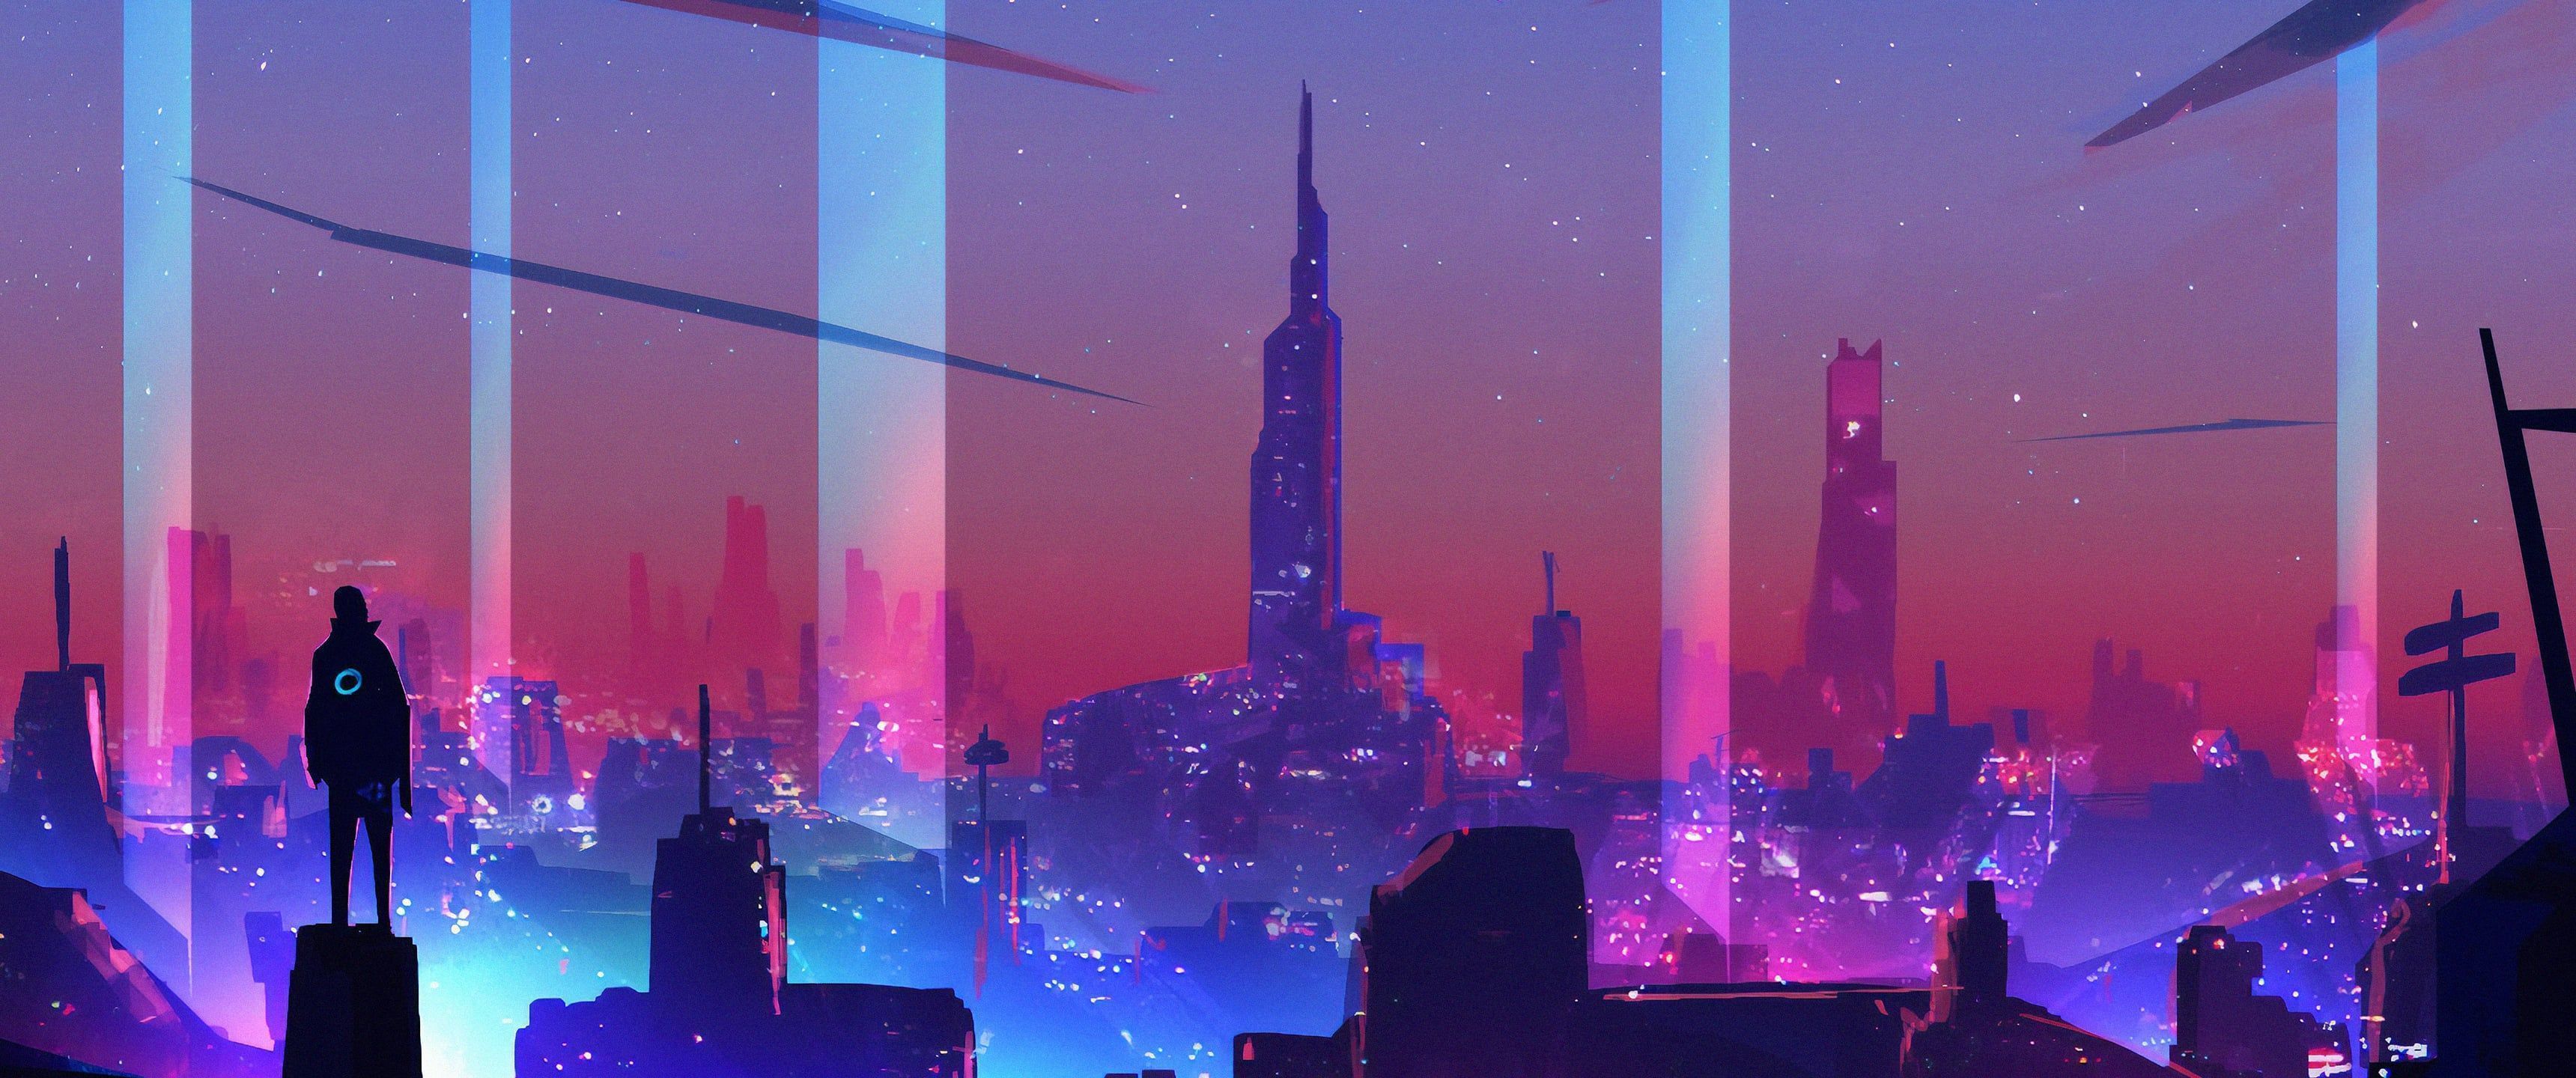 A person standing on a ledge looking out at a city lit up at night - 3440x1440